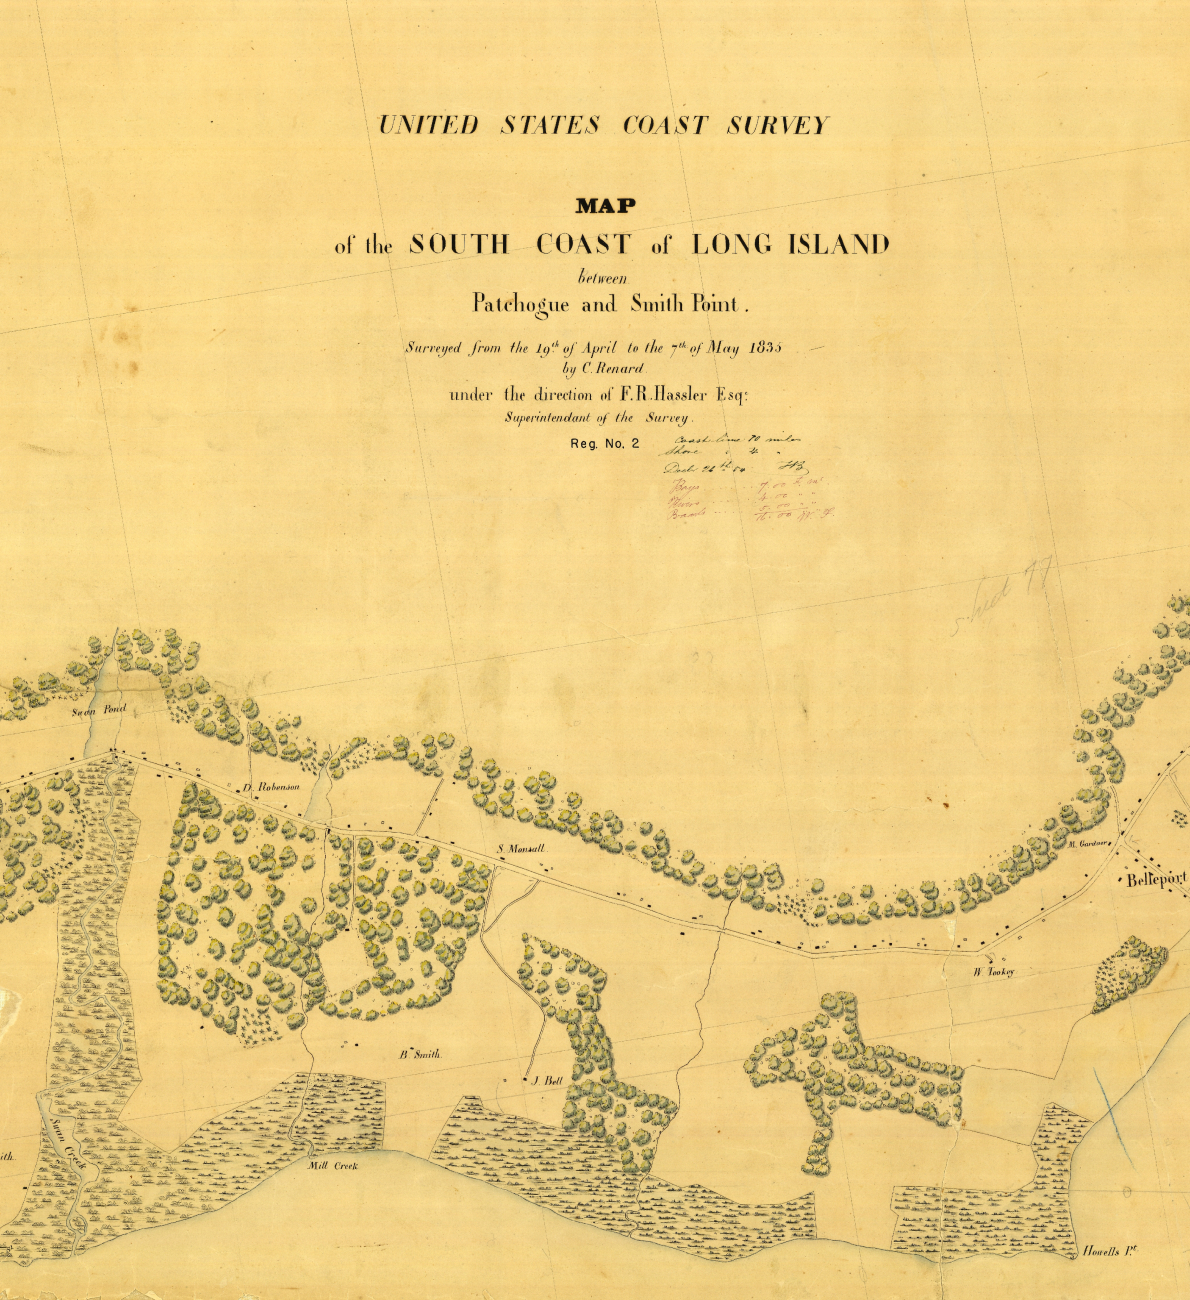 Topographic sheet between Patchogue and Smith Point, Long Island, by CharlesRenard